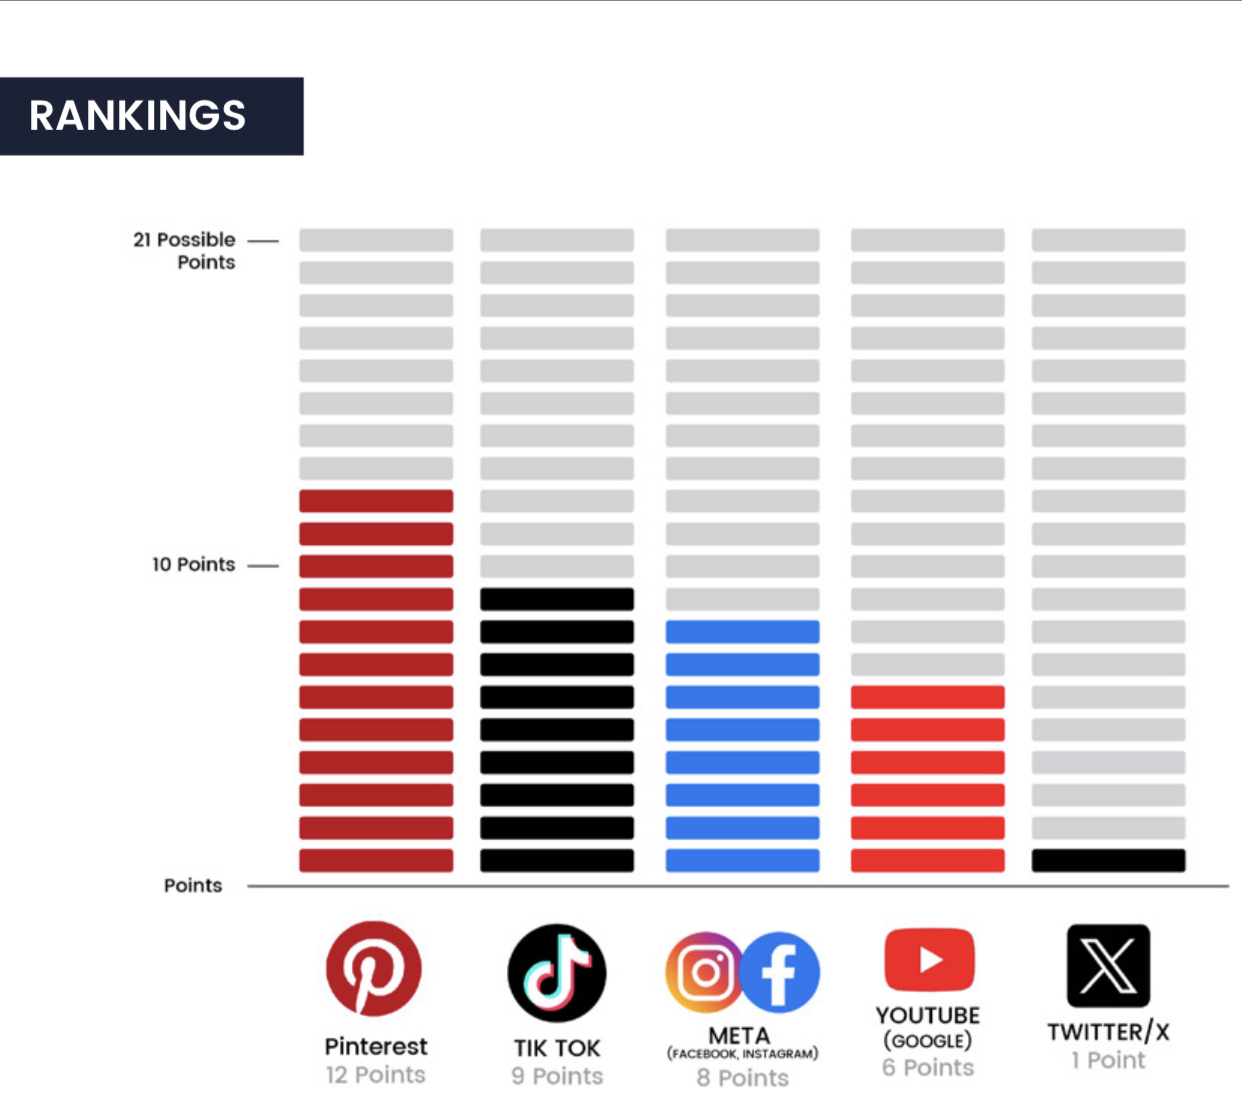 Social media ranking by the Climate Action Against Disinformation.